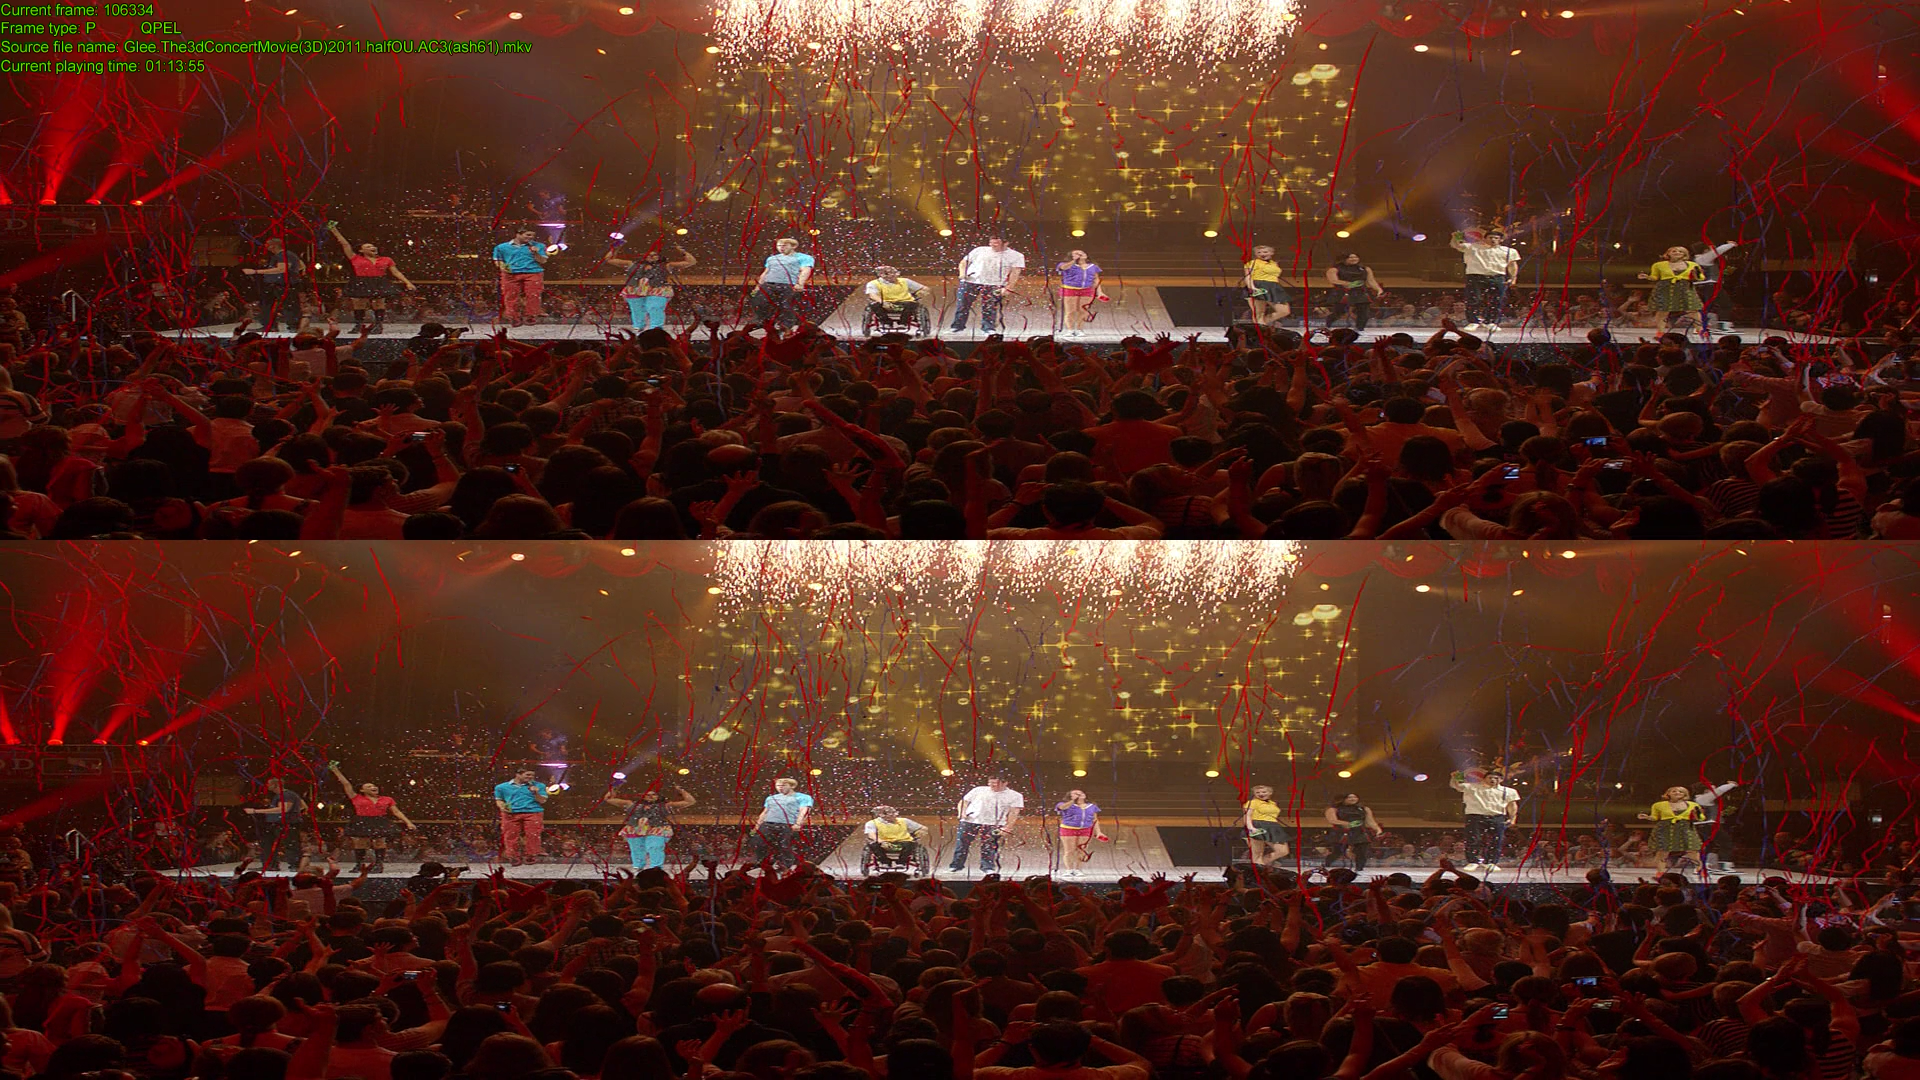 Glee- The 3D Concert Movie (2011)7.png